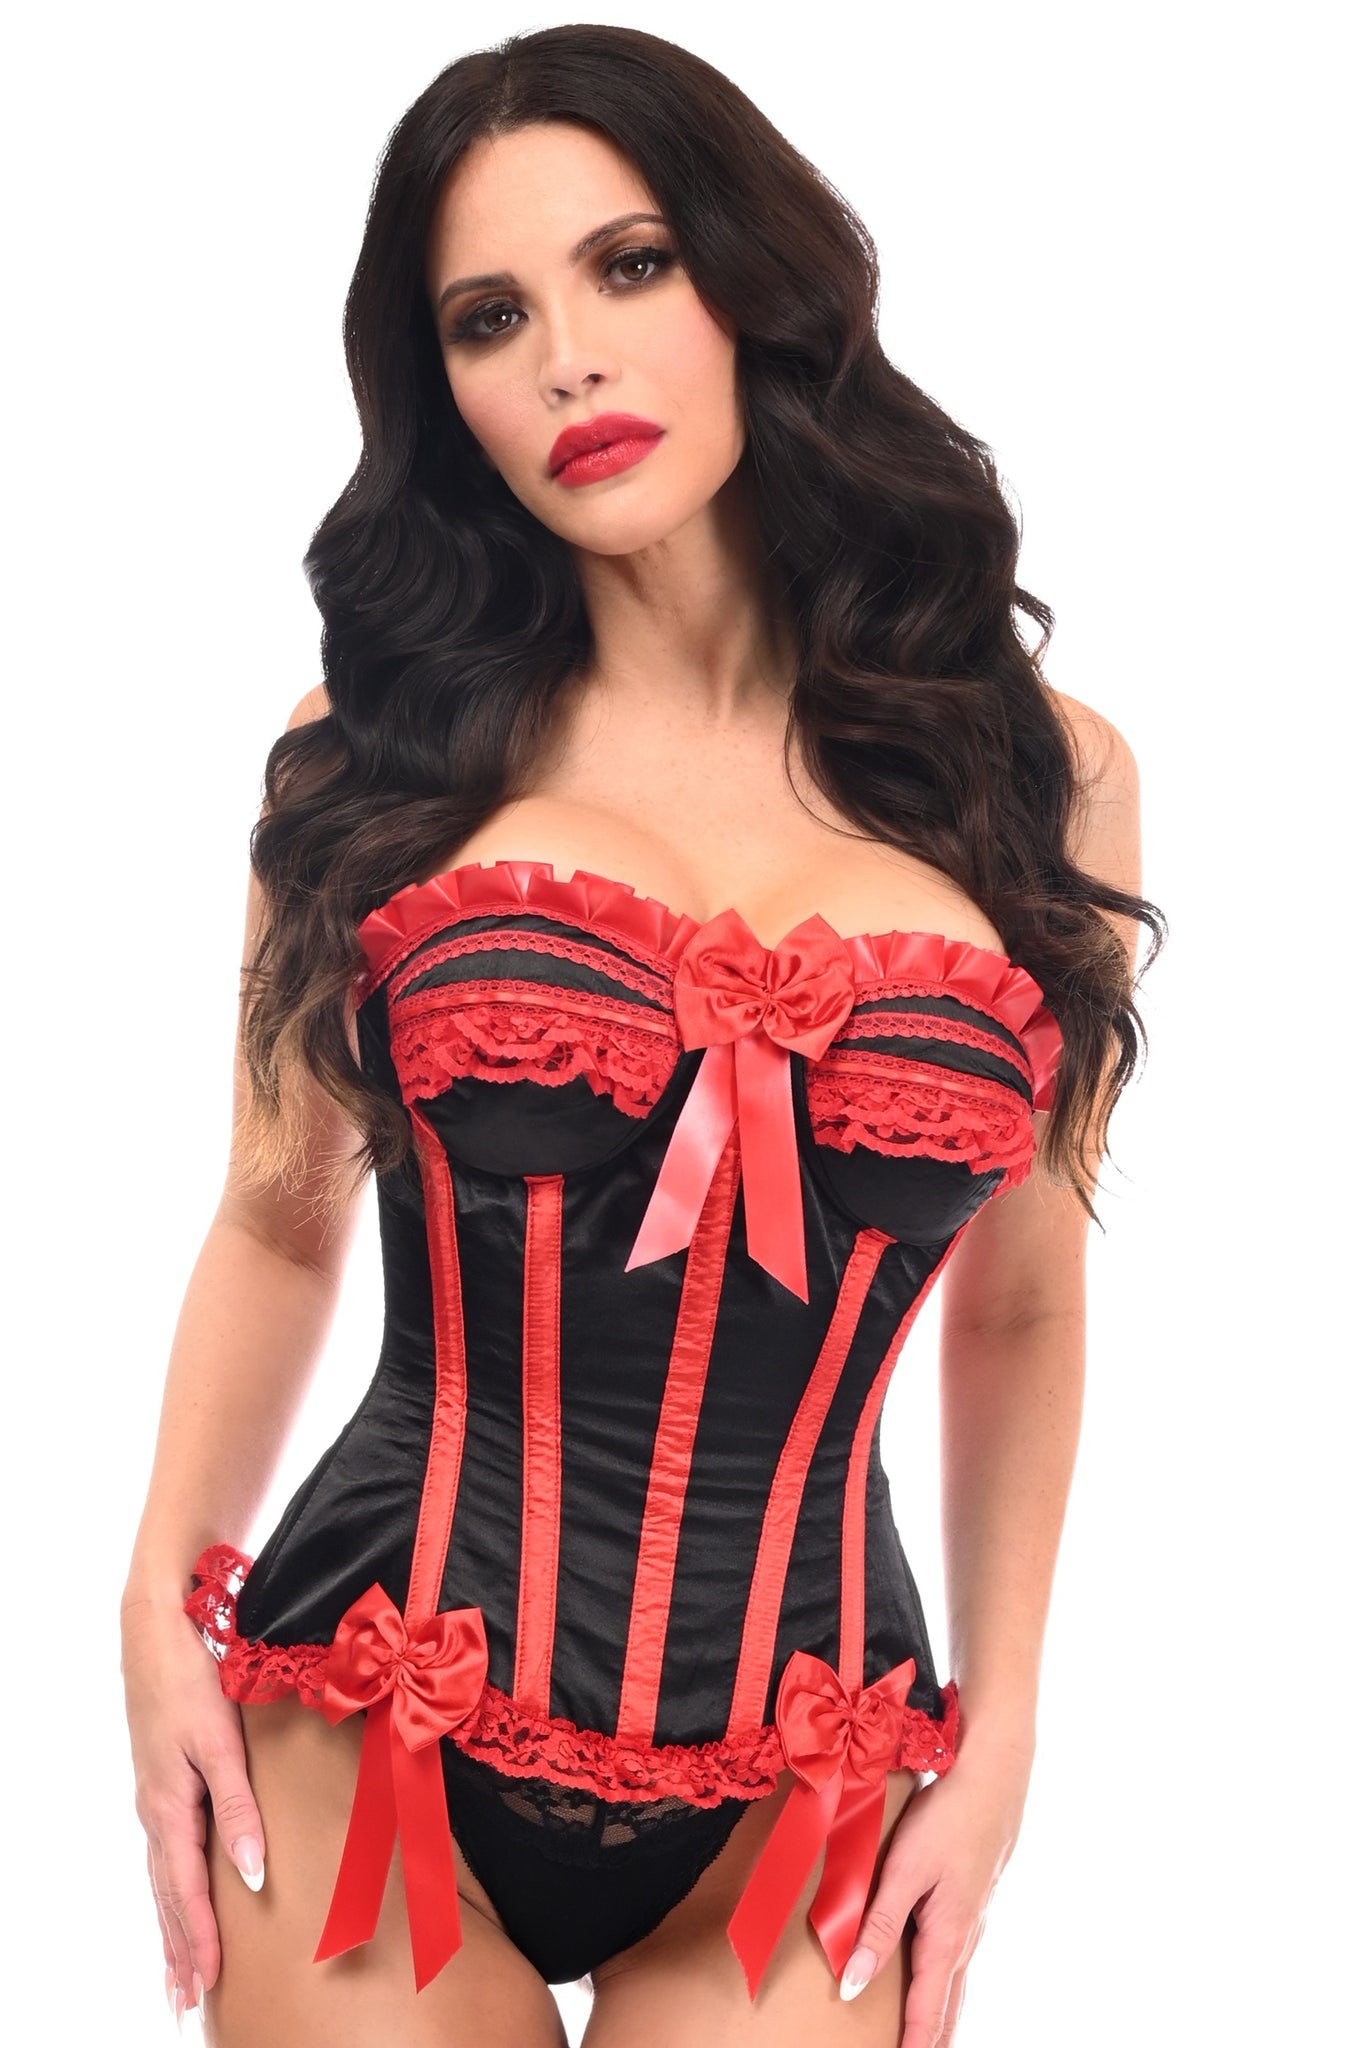 Top Drawer Steel Boned Burlesque Corset by Daisy Corsets in 3 Color Choices in Size S, M, L, XL, 2X, 3X, 4X, 5X, or 6X